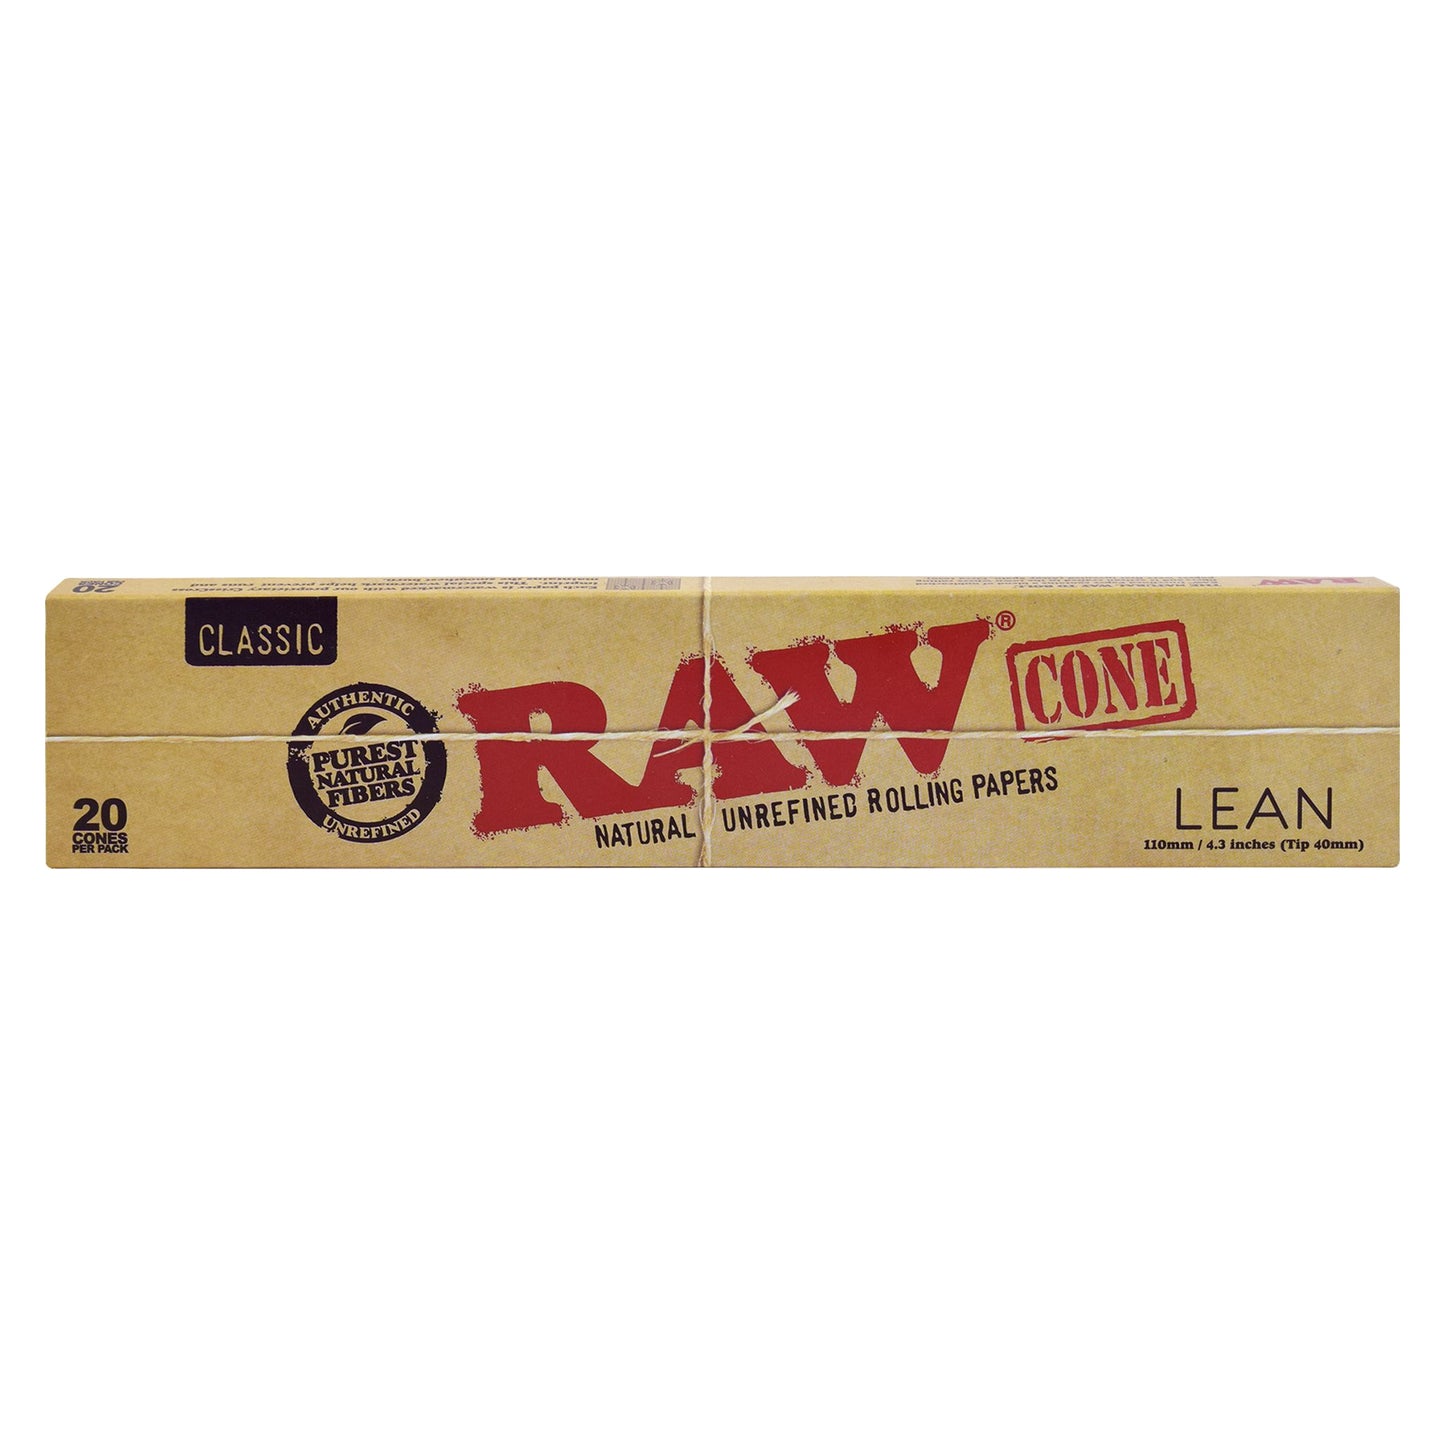 RAW - Natural Hemp Pre-Rolled Cones Lean Size